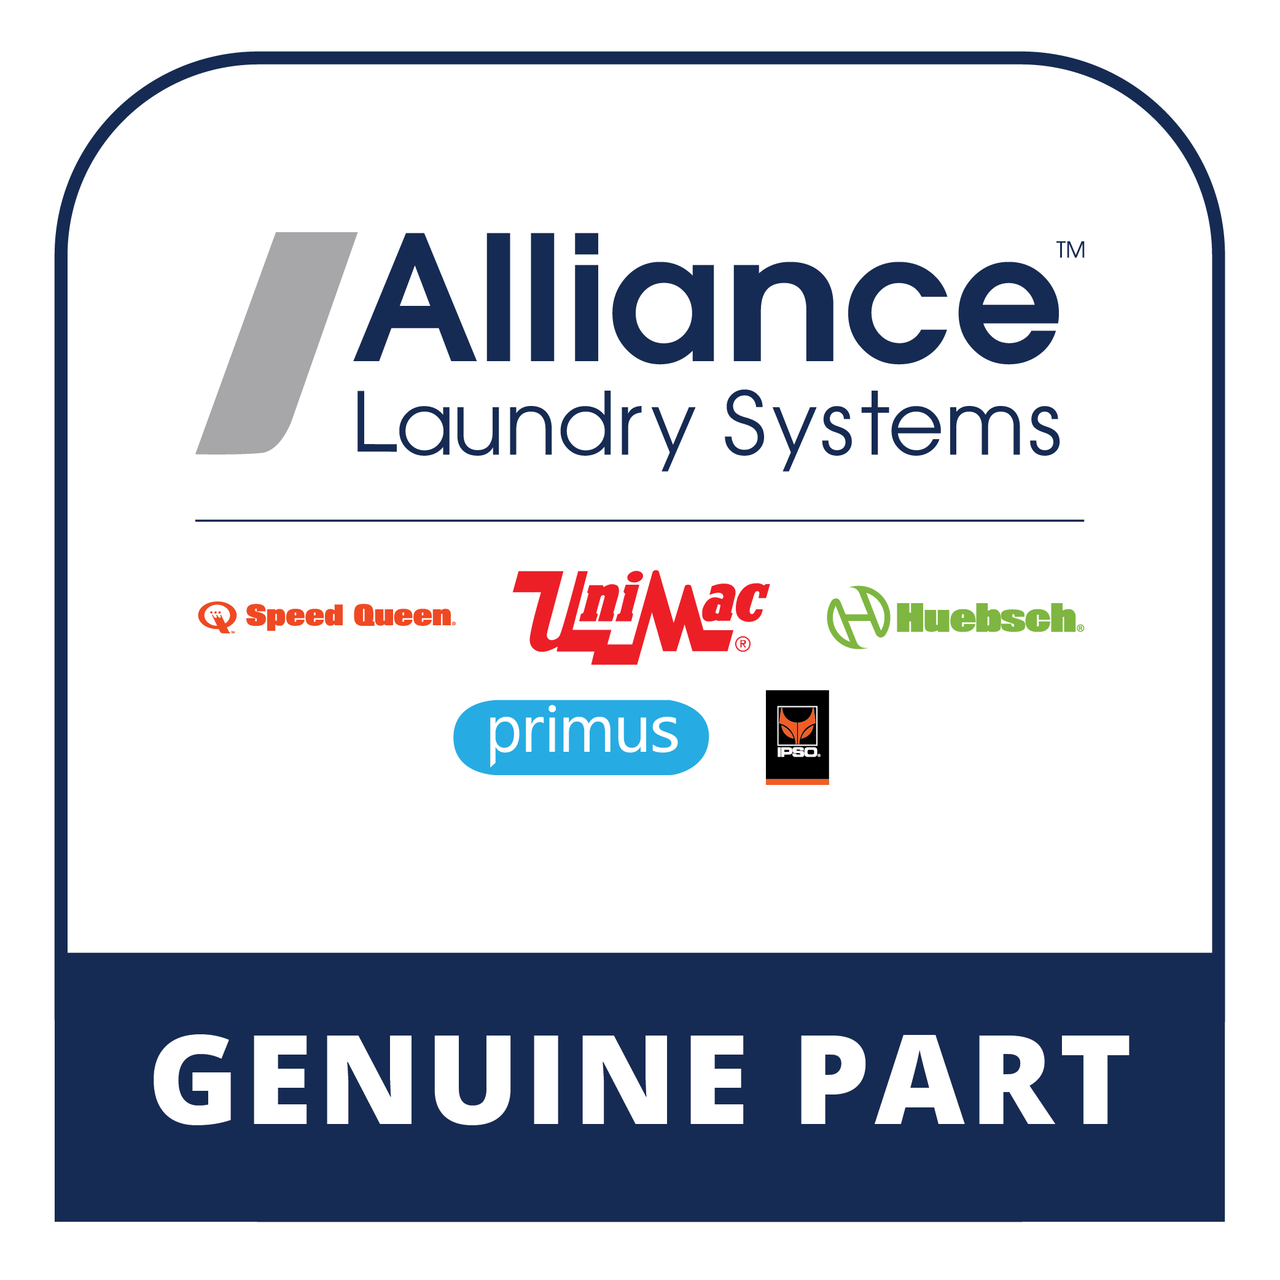 Alliance Laundry Systems D511485 - Overlay Stk Dry-Mdc-Cn/Crd-Blk - Genuine Alliance Laundry Systems Part